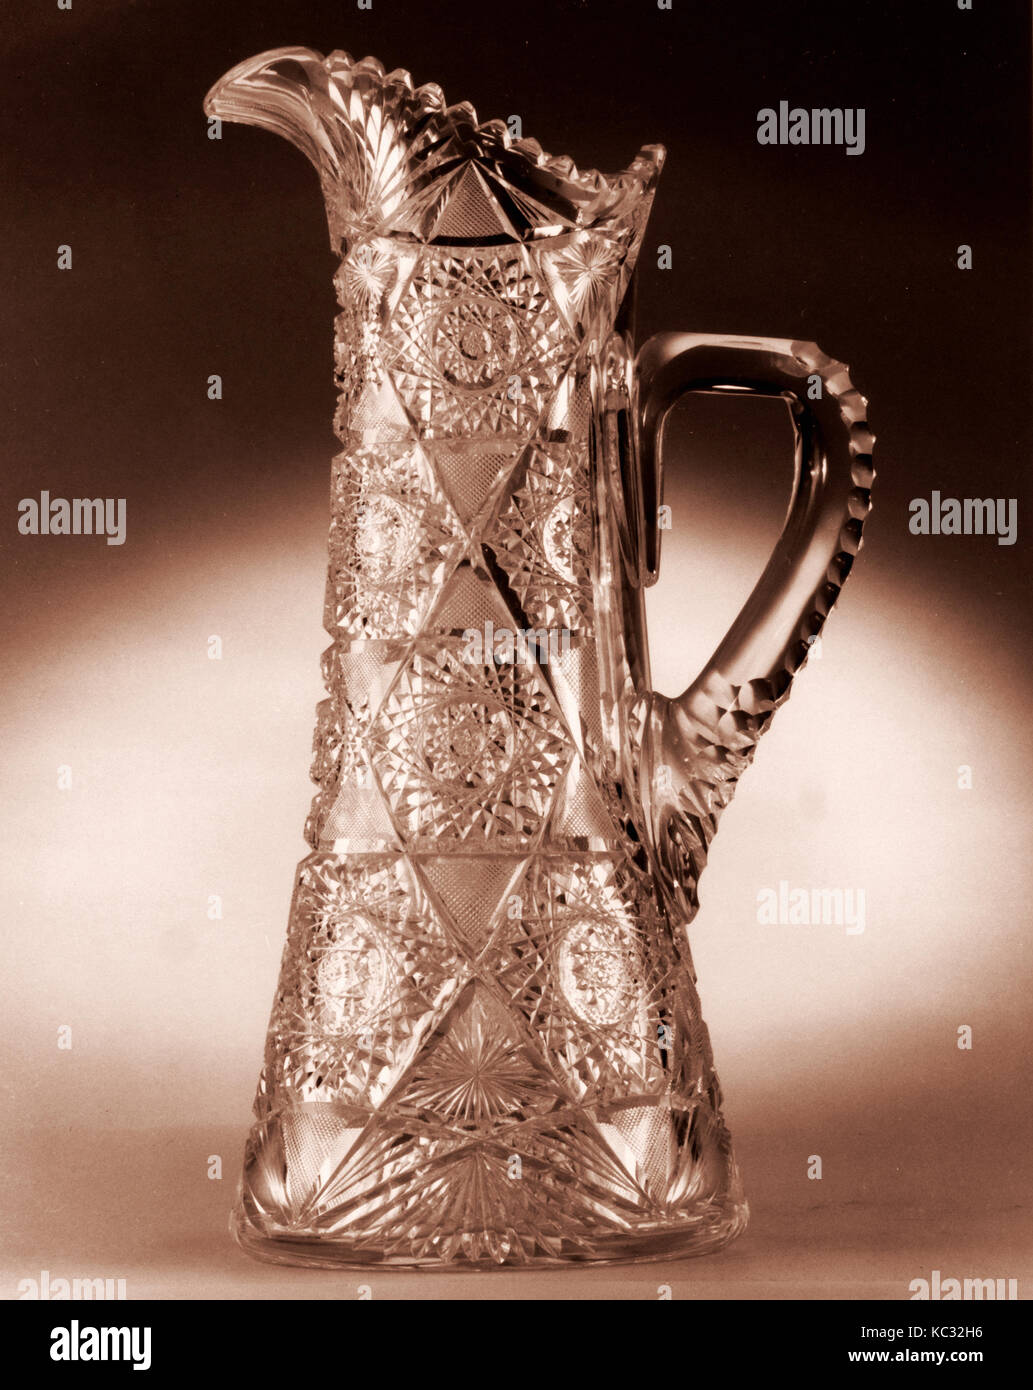 Pitcher, 1890, Made in White Mills, Pennsylvania, United States, American, Cut blown glass, Glass, Dorflinger Glass Works (1865 Stock Photo